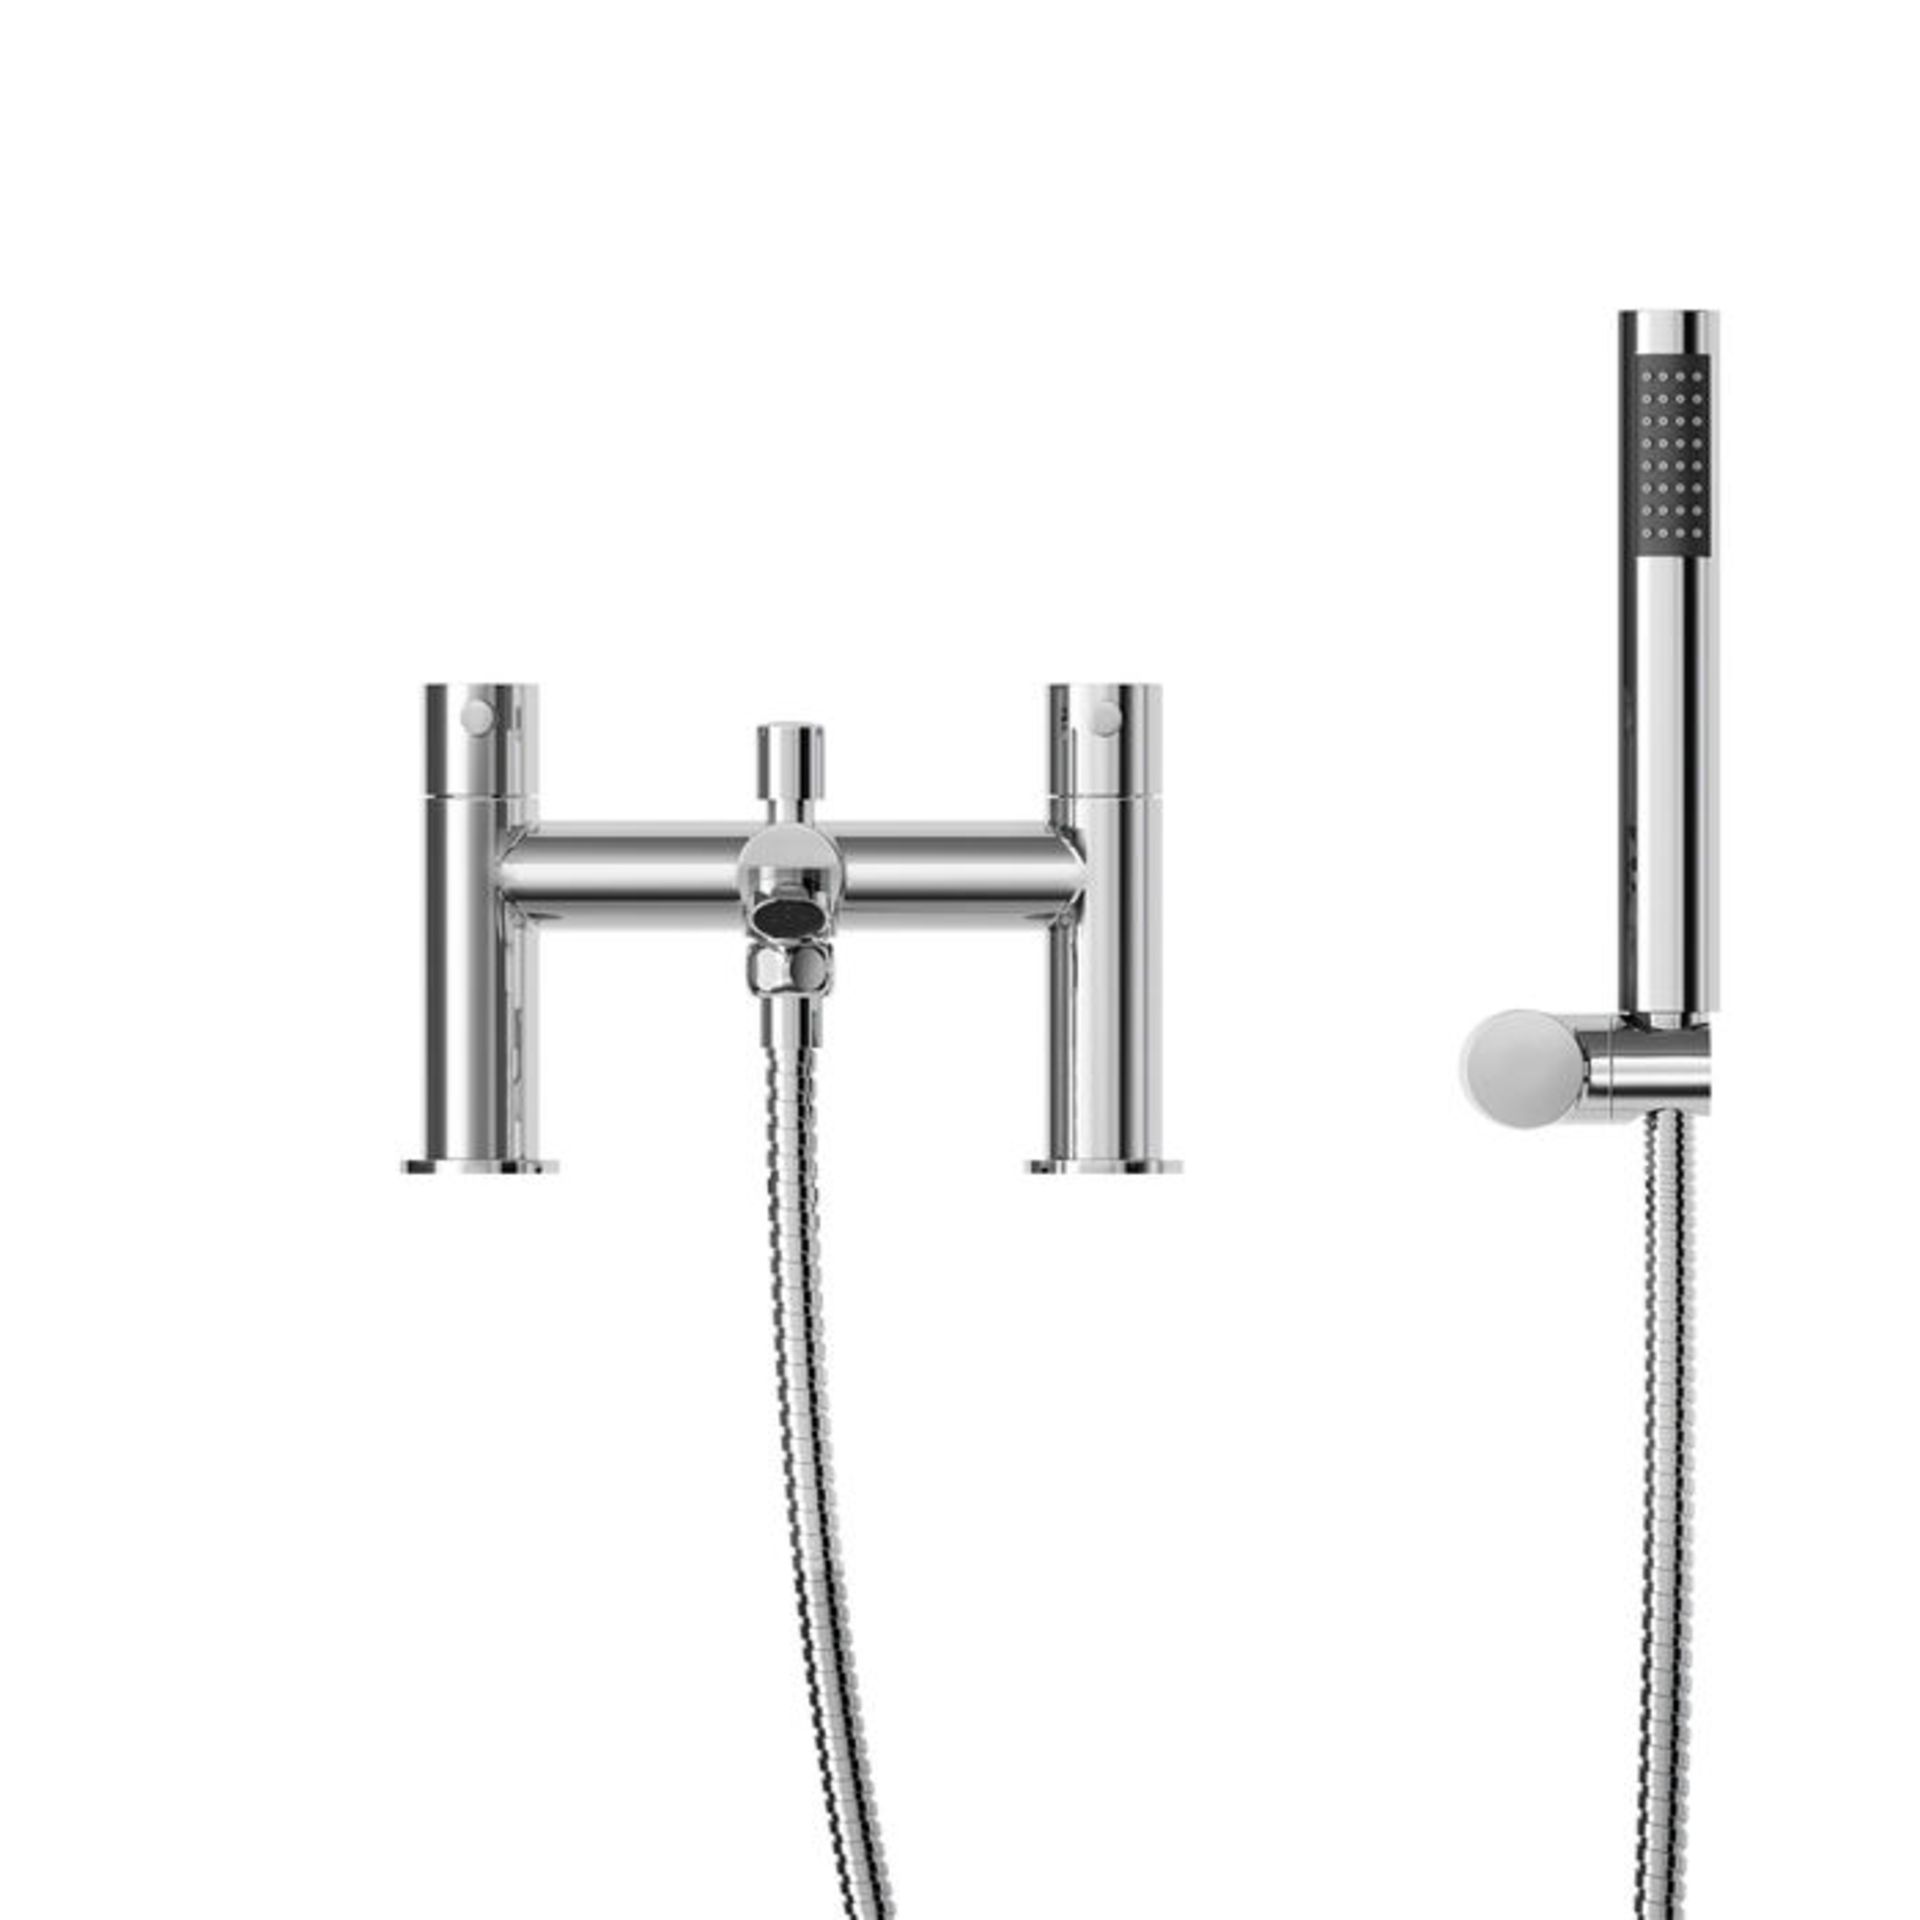 (PT220) Bath Mixer Shower Tap & Handheld. Chrome plated solid brass 1/4 turn solid brass valve - Image 2 of 2